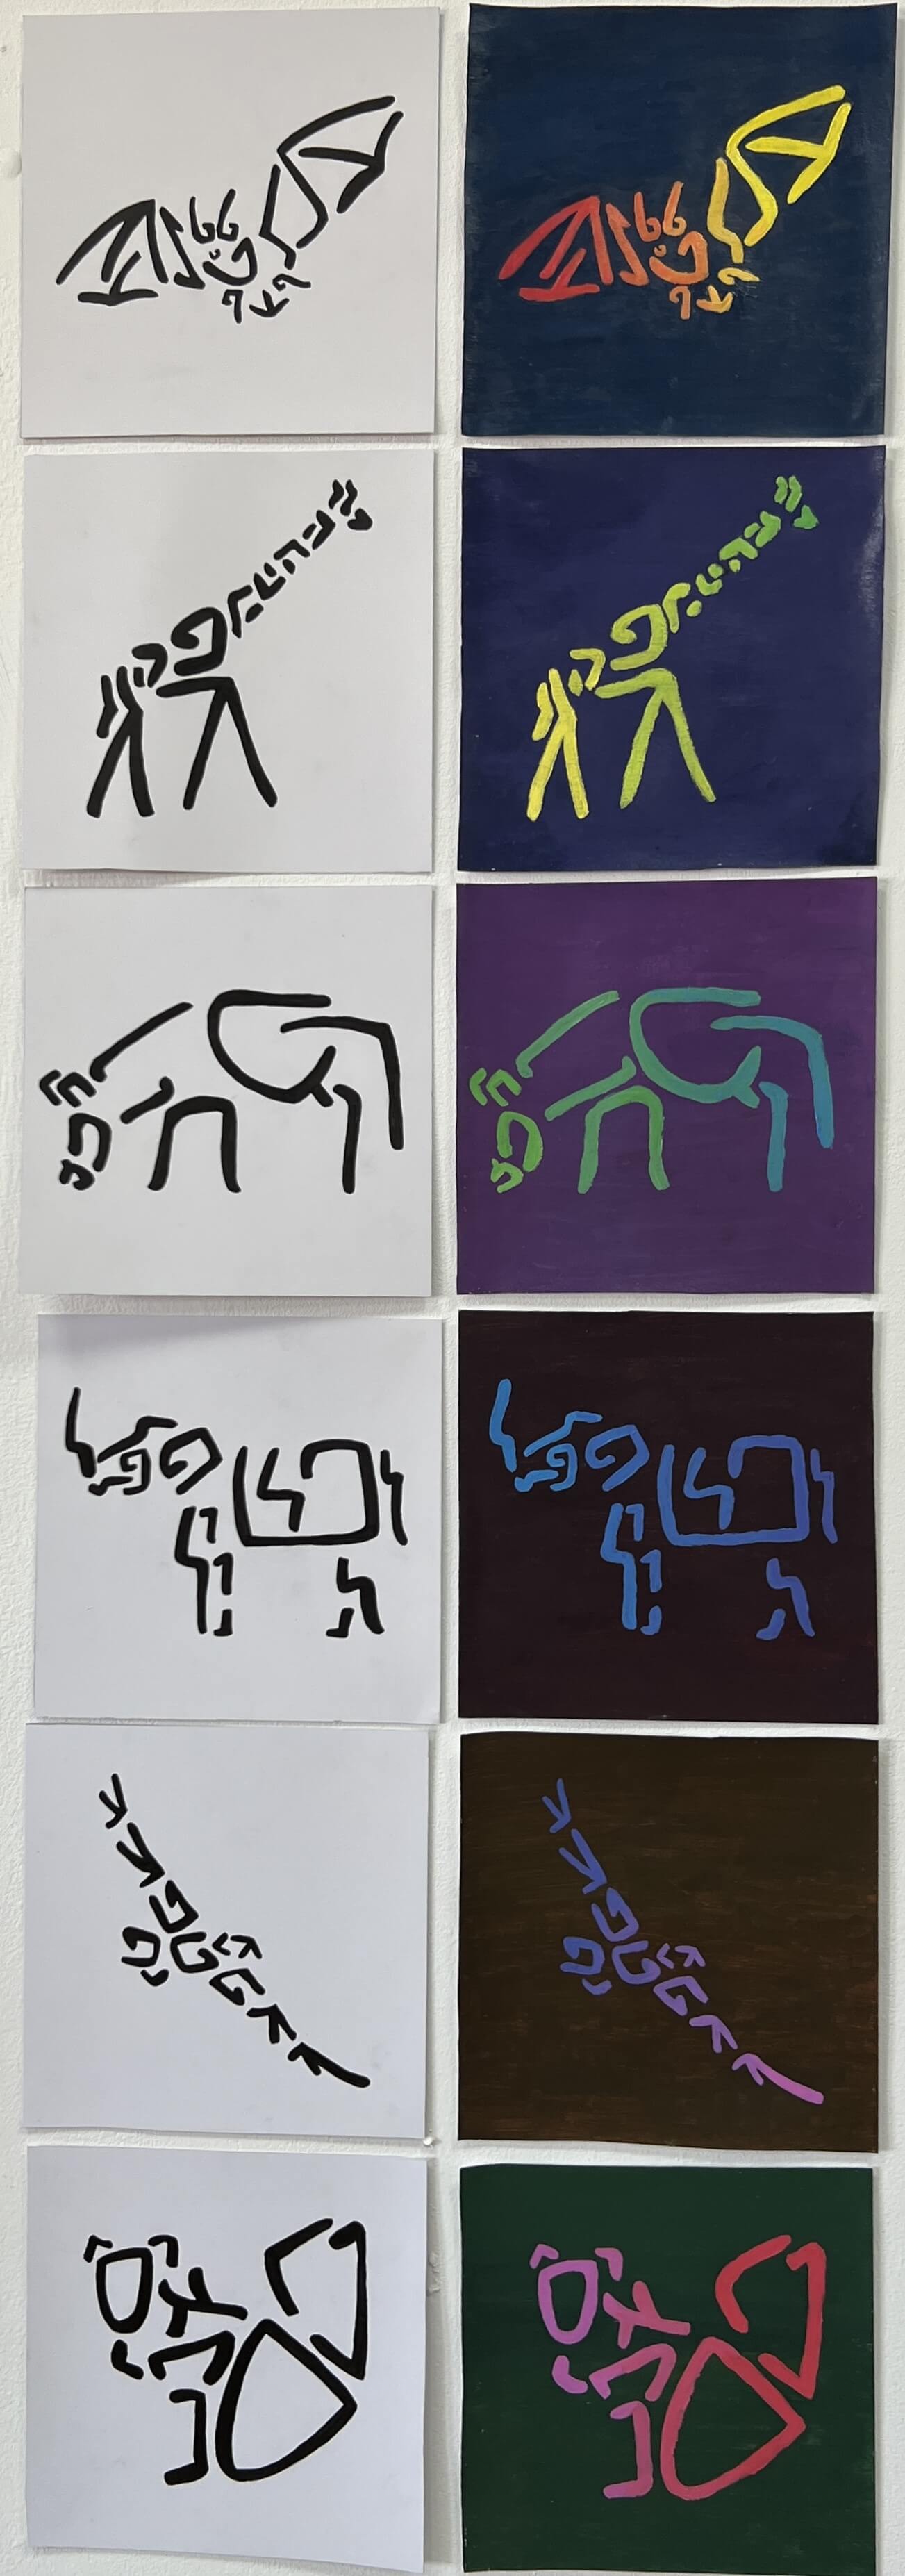 two rows of animals made out of hebrew letter, one is black and white and the other is colorful